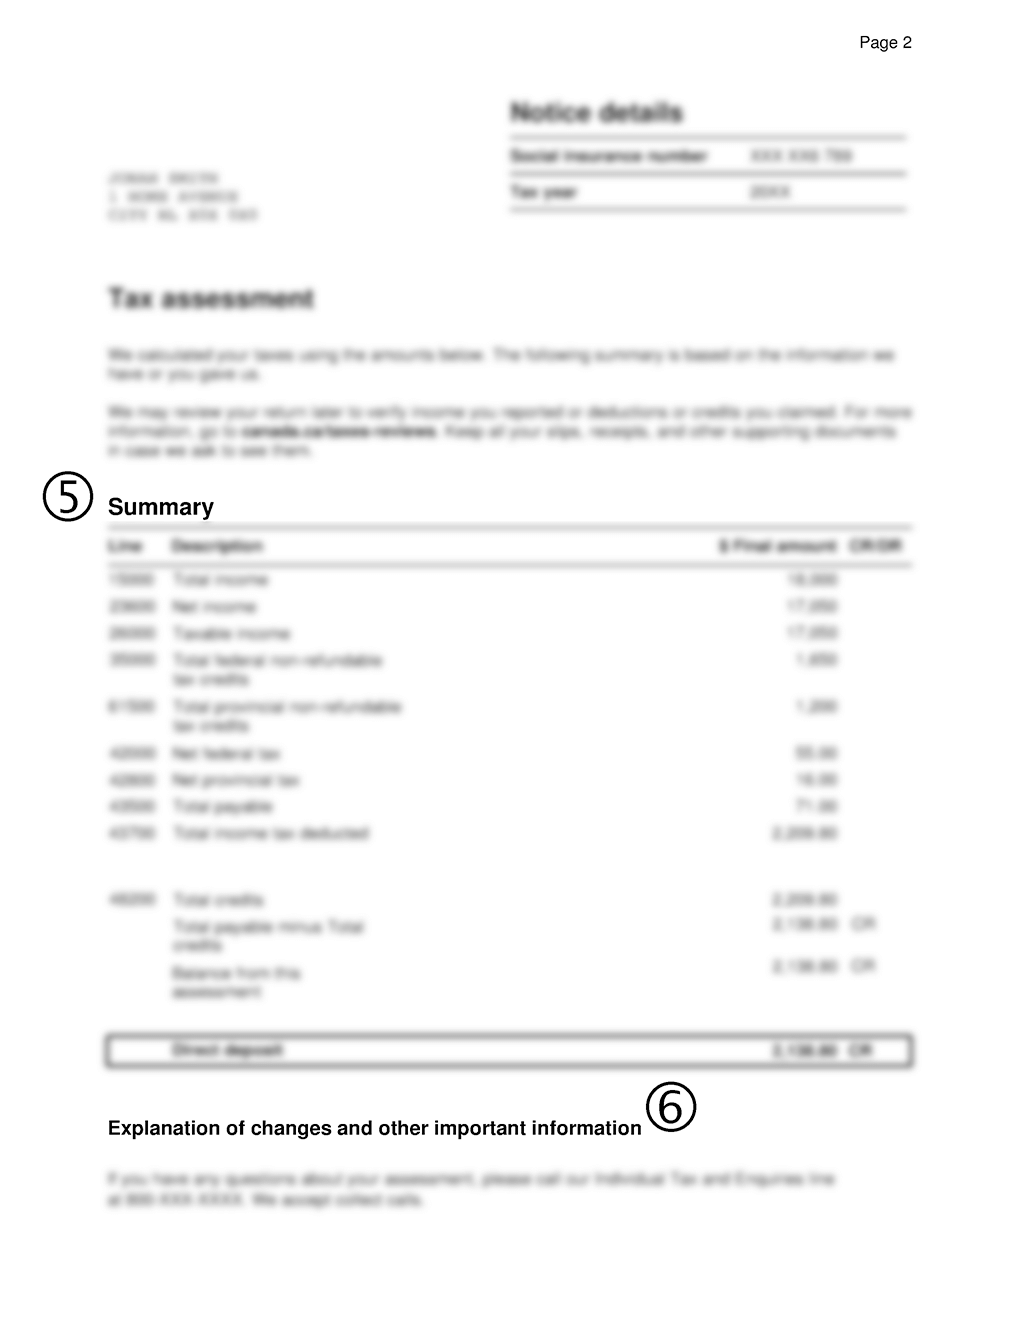 Page two of the notice of assessment, that contains the breakdown of the amounts assessed.